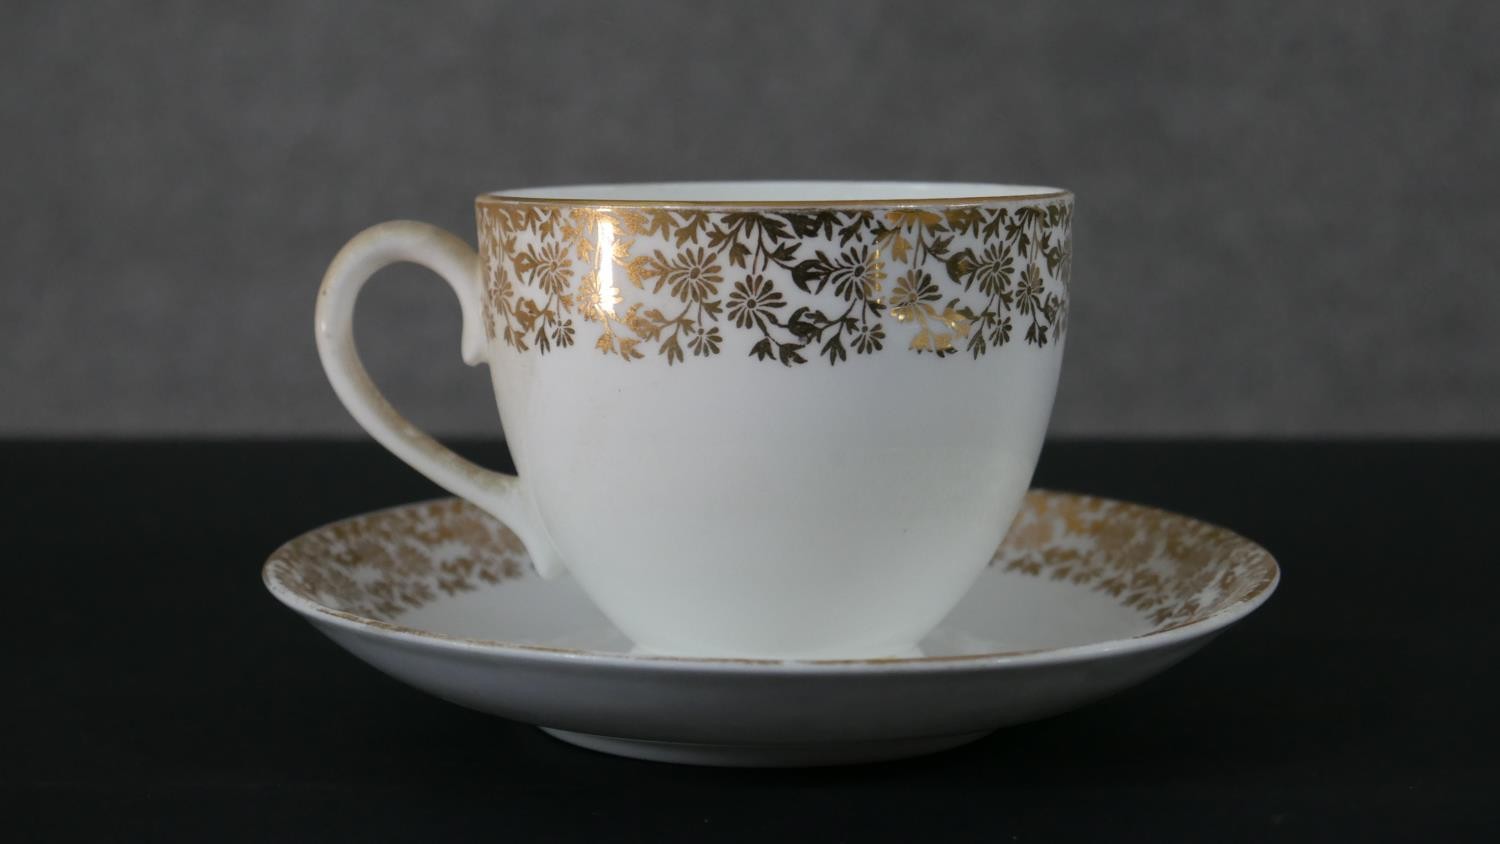 An Adderley gilded floral design fine bone china part six person tea set. Six tea cups and - Image 2 of 8